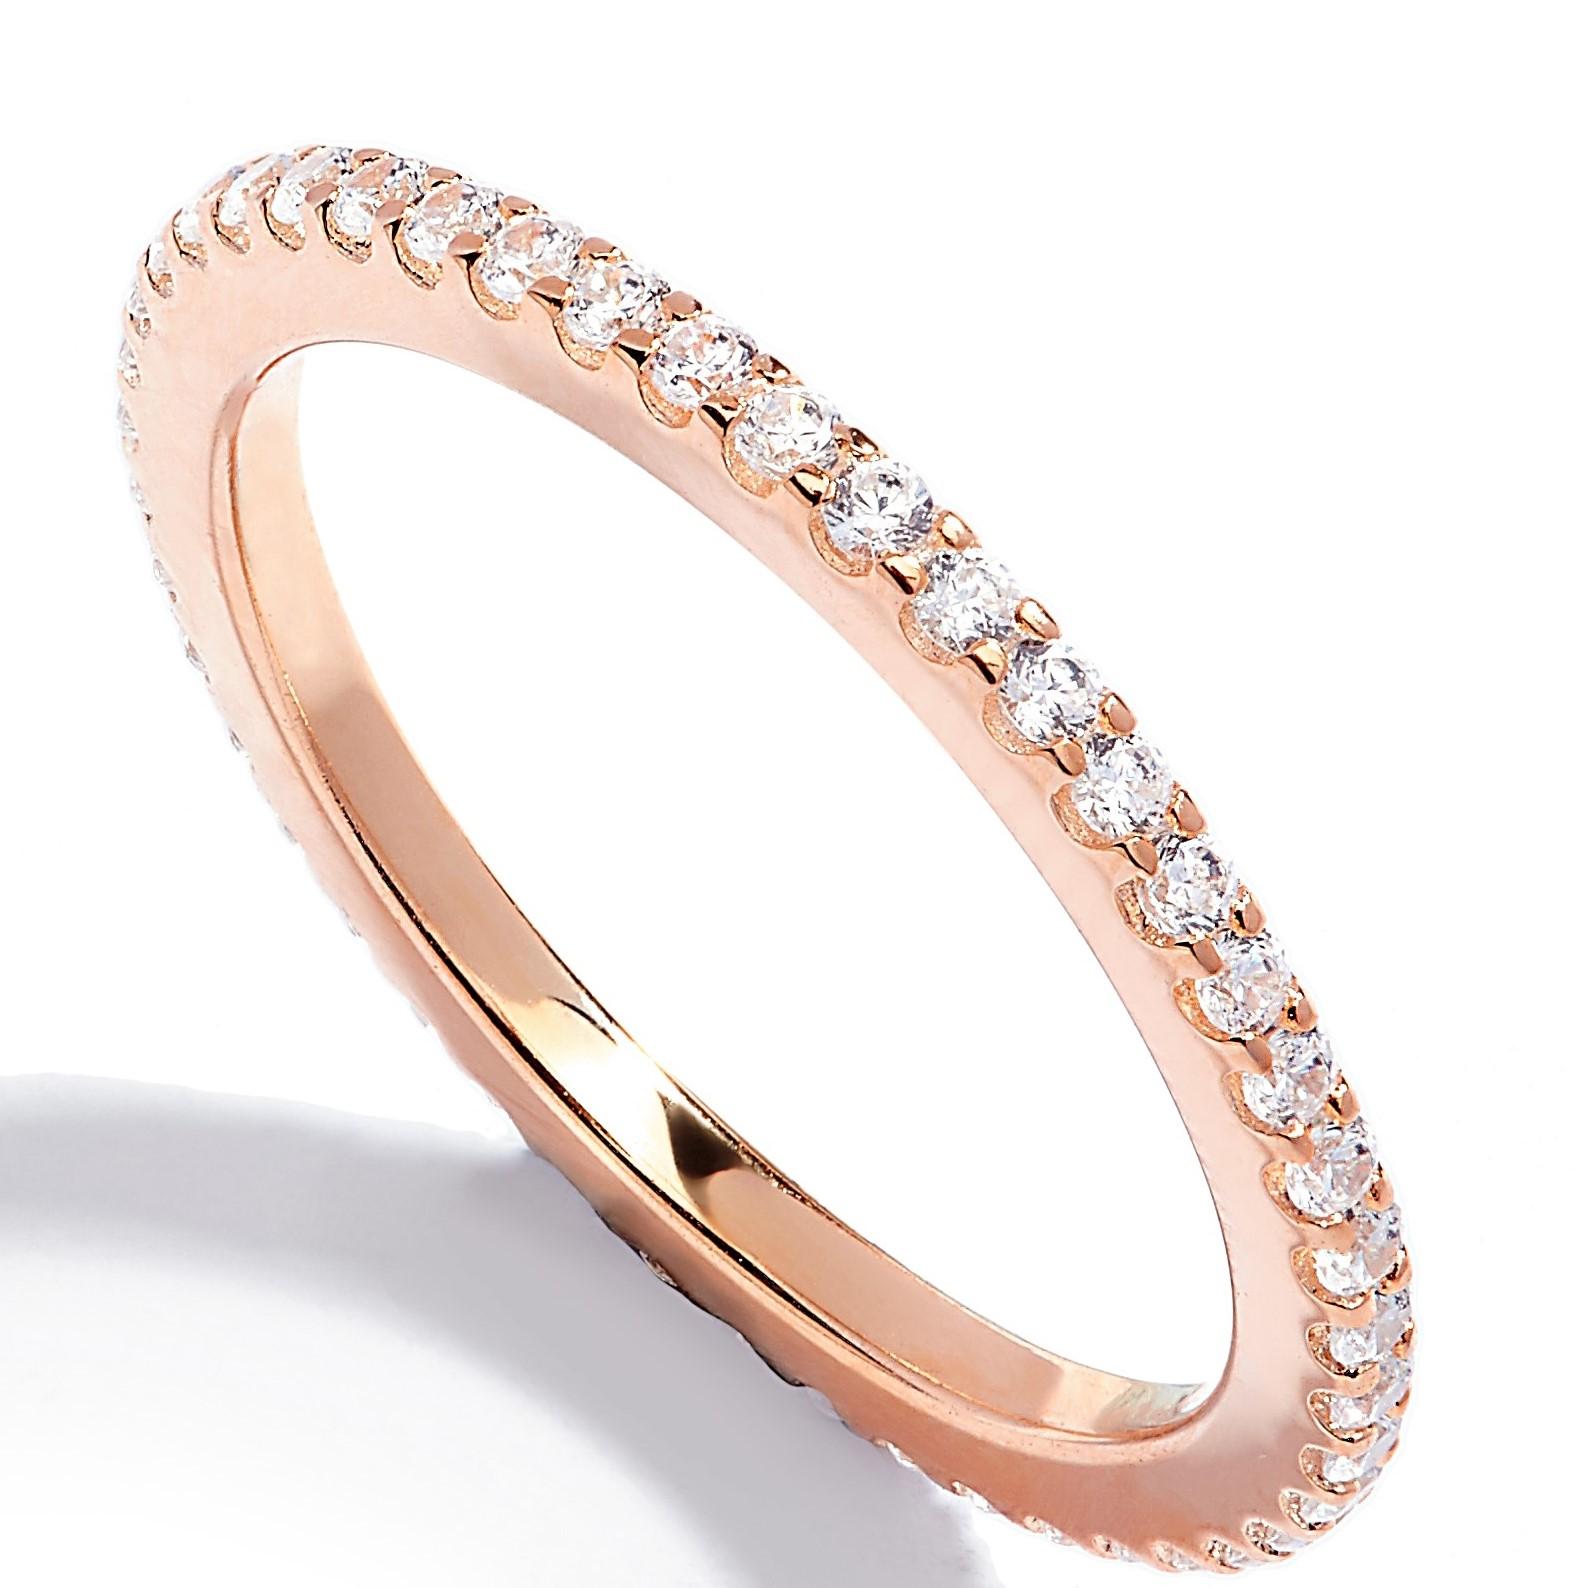 Three of our best-selling timeless full eternity rings in rhodium, rose gold or yellow gold plating, wear one, two or three altogether for an on-trend stacked look.

A beautifully classic ring that's so easy to wear.

Featuring 0.85ct of round